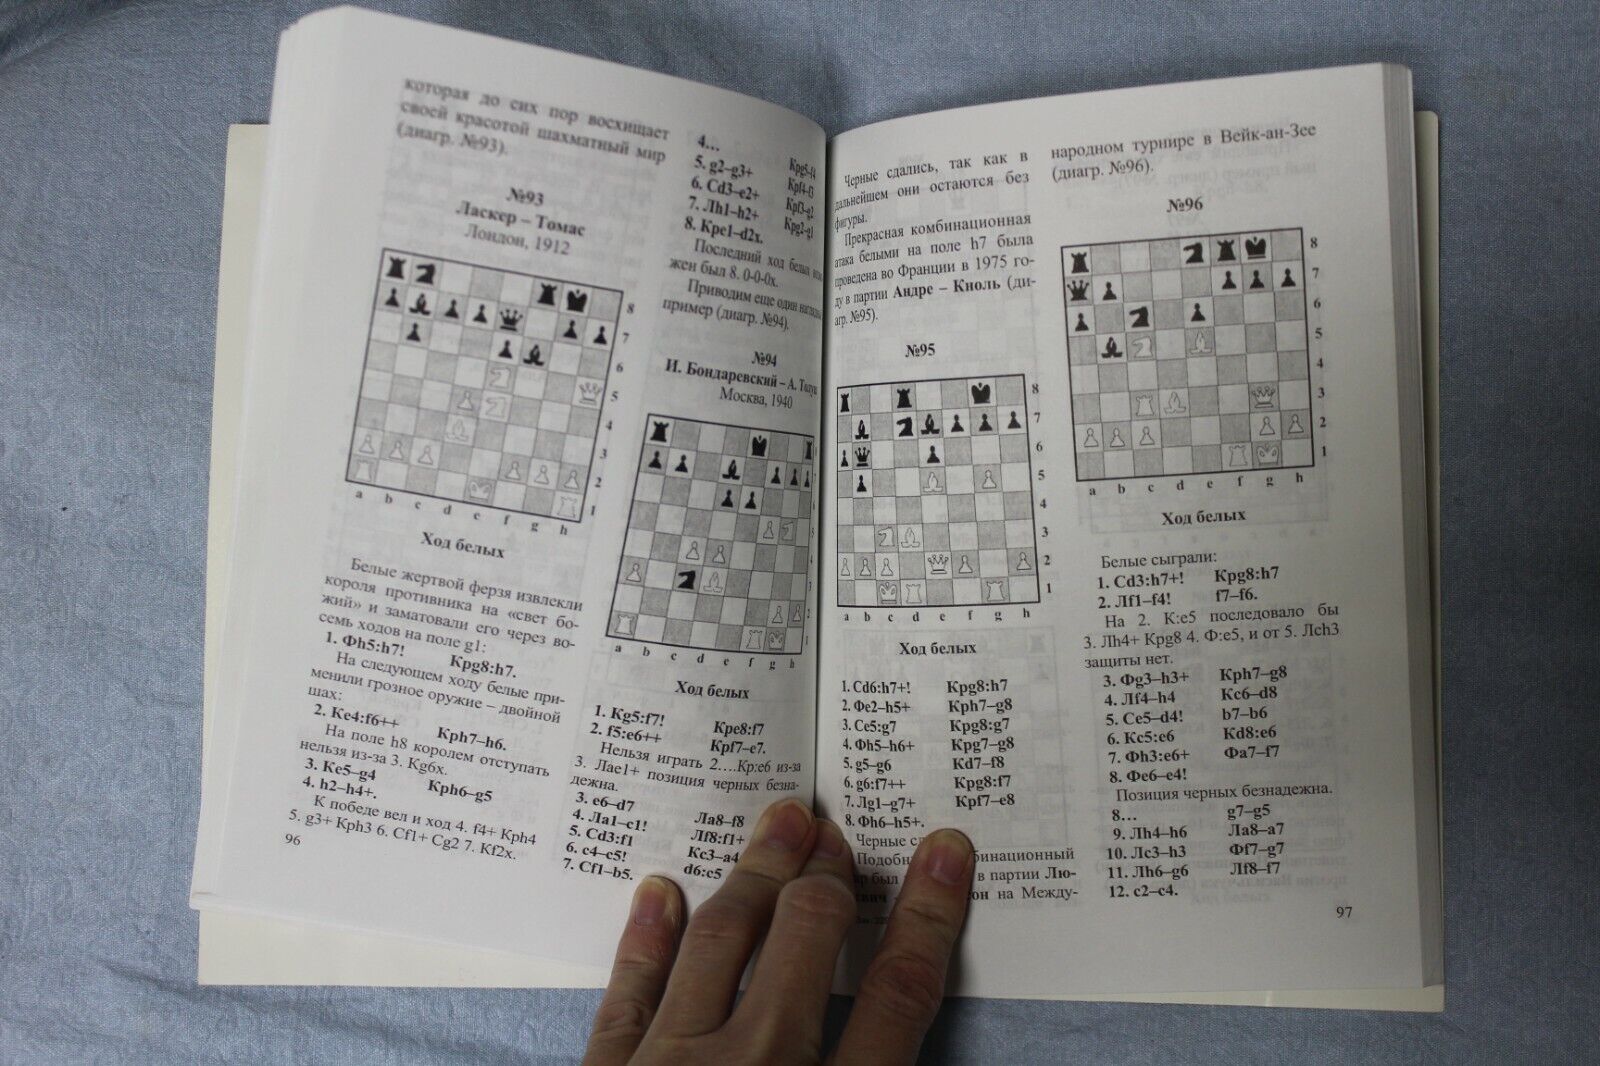 11061.Chess book: Chess for the Little Ones w illustrations, Kogan. Kaluga 2008